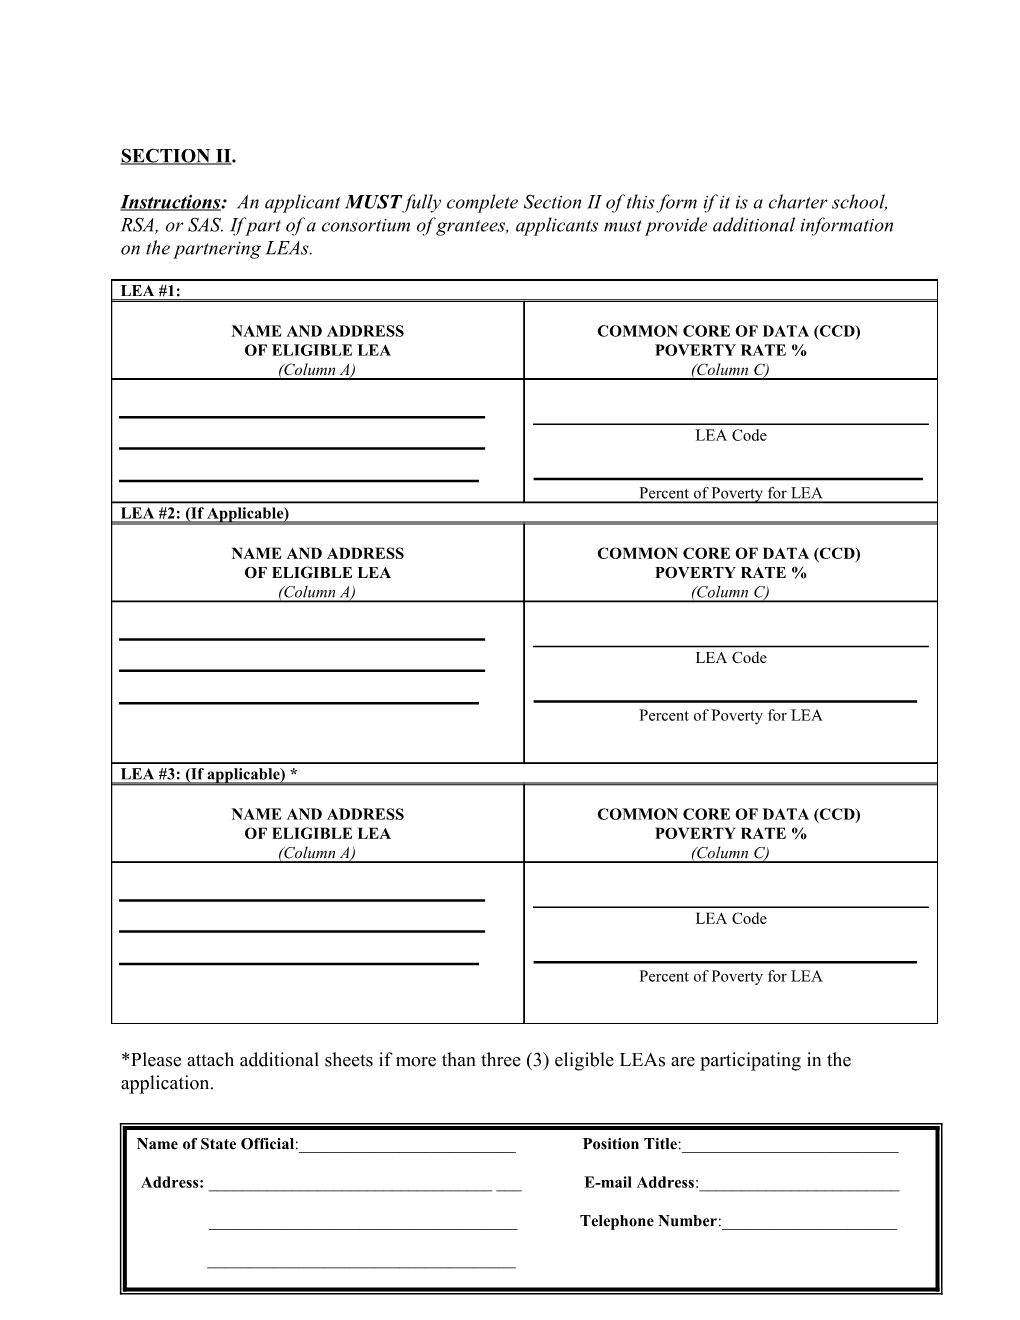 Literacy Through School Libraries Applicant Eligibility Form FY 2011 (MS WORD)